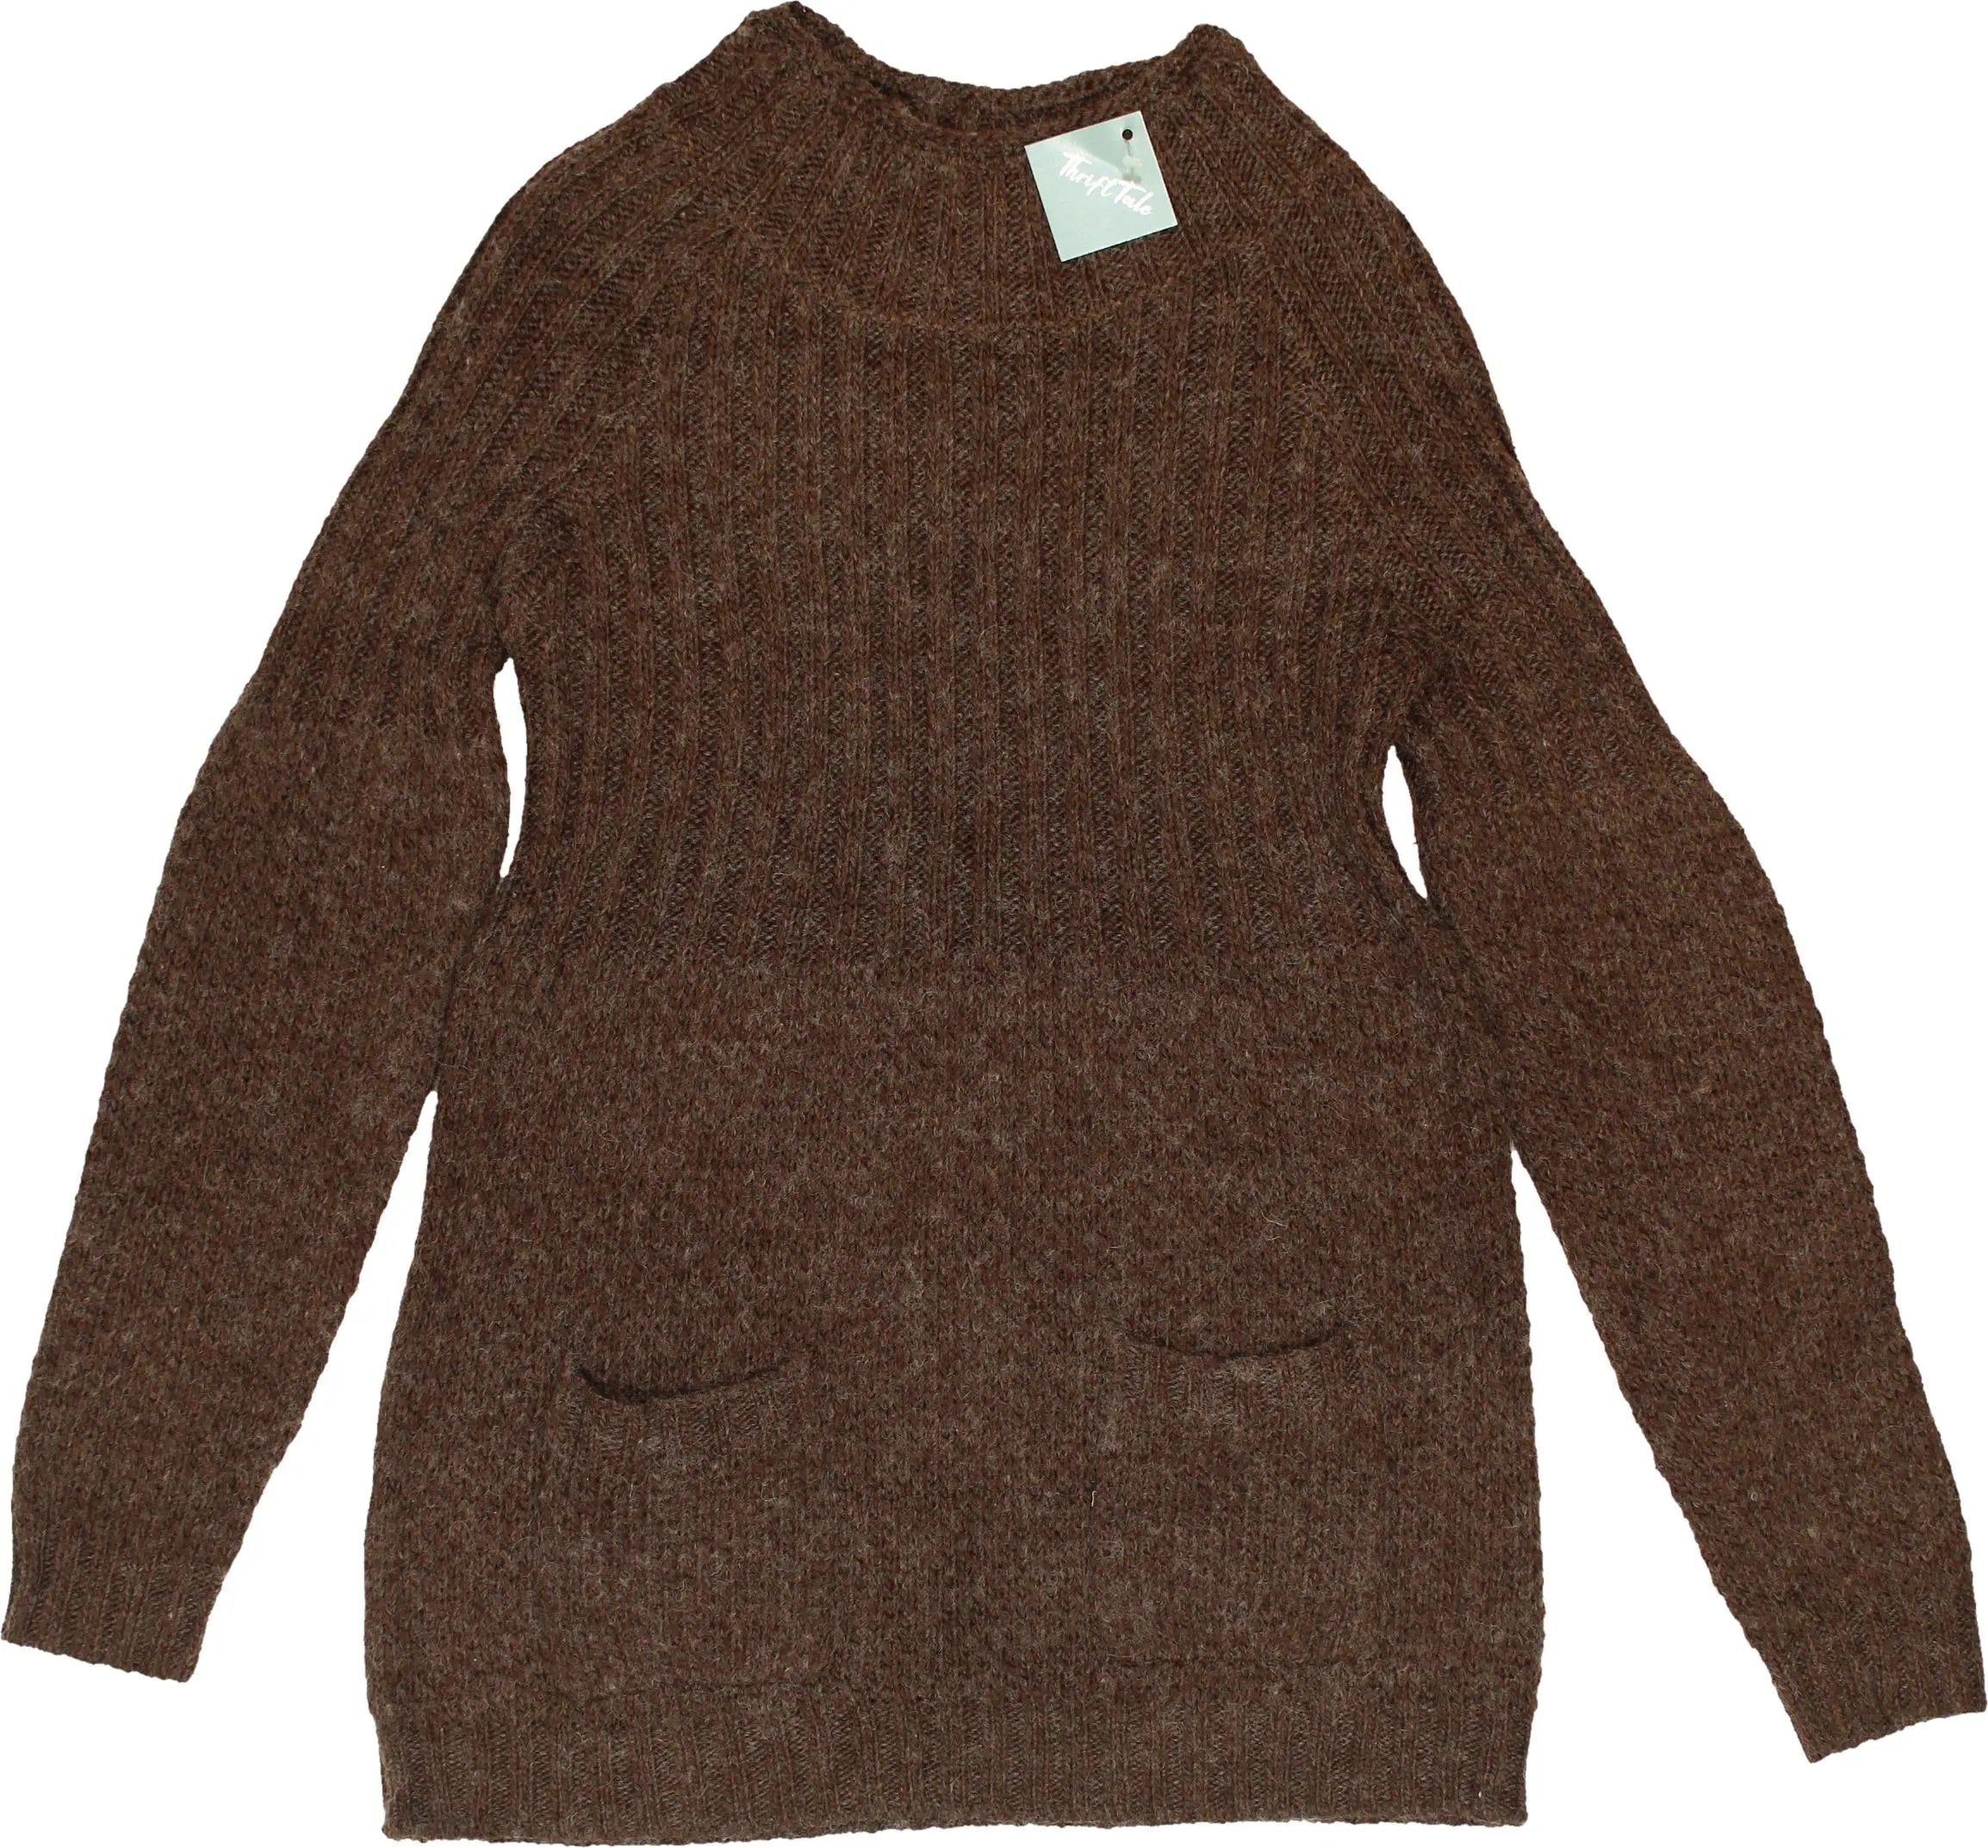 C&A - Brown Jumper- ThriftTale.com - Vintage and second handclothing